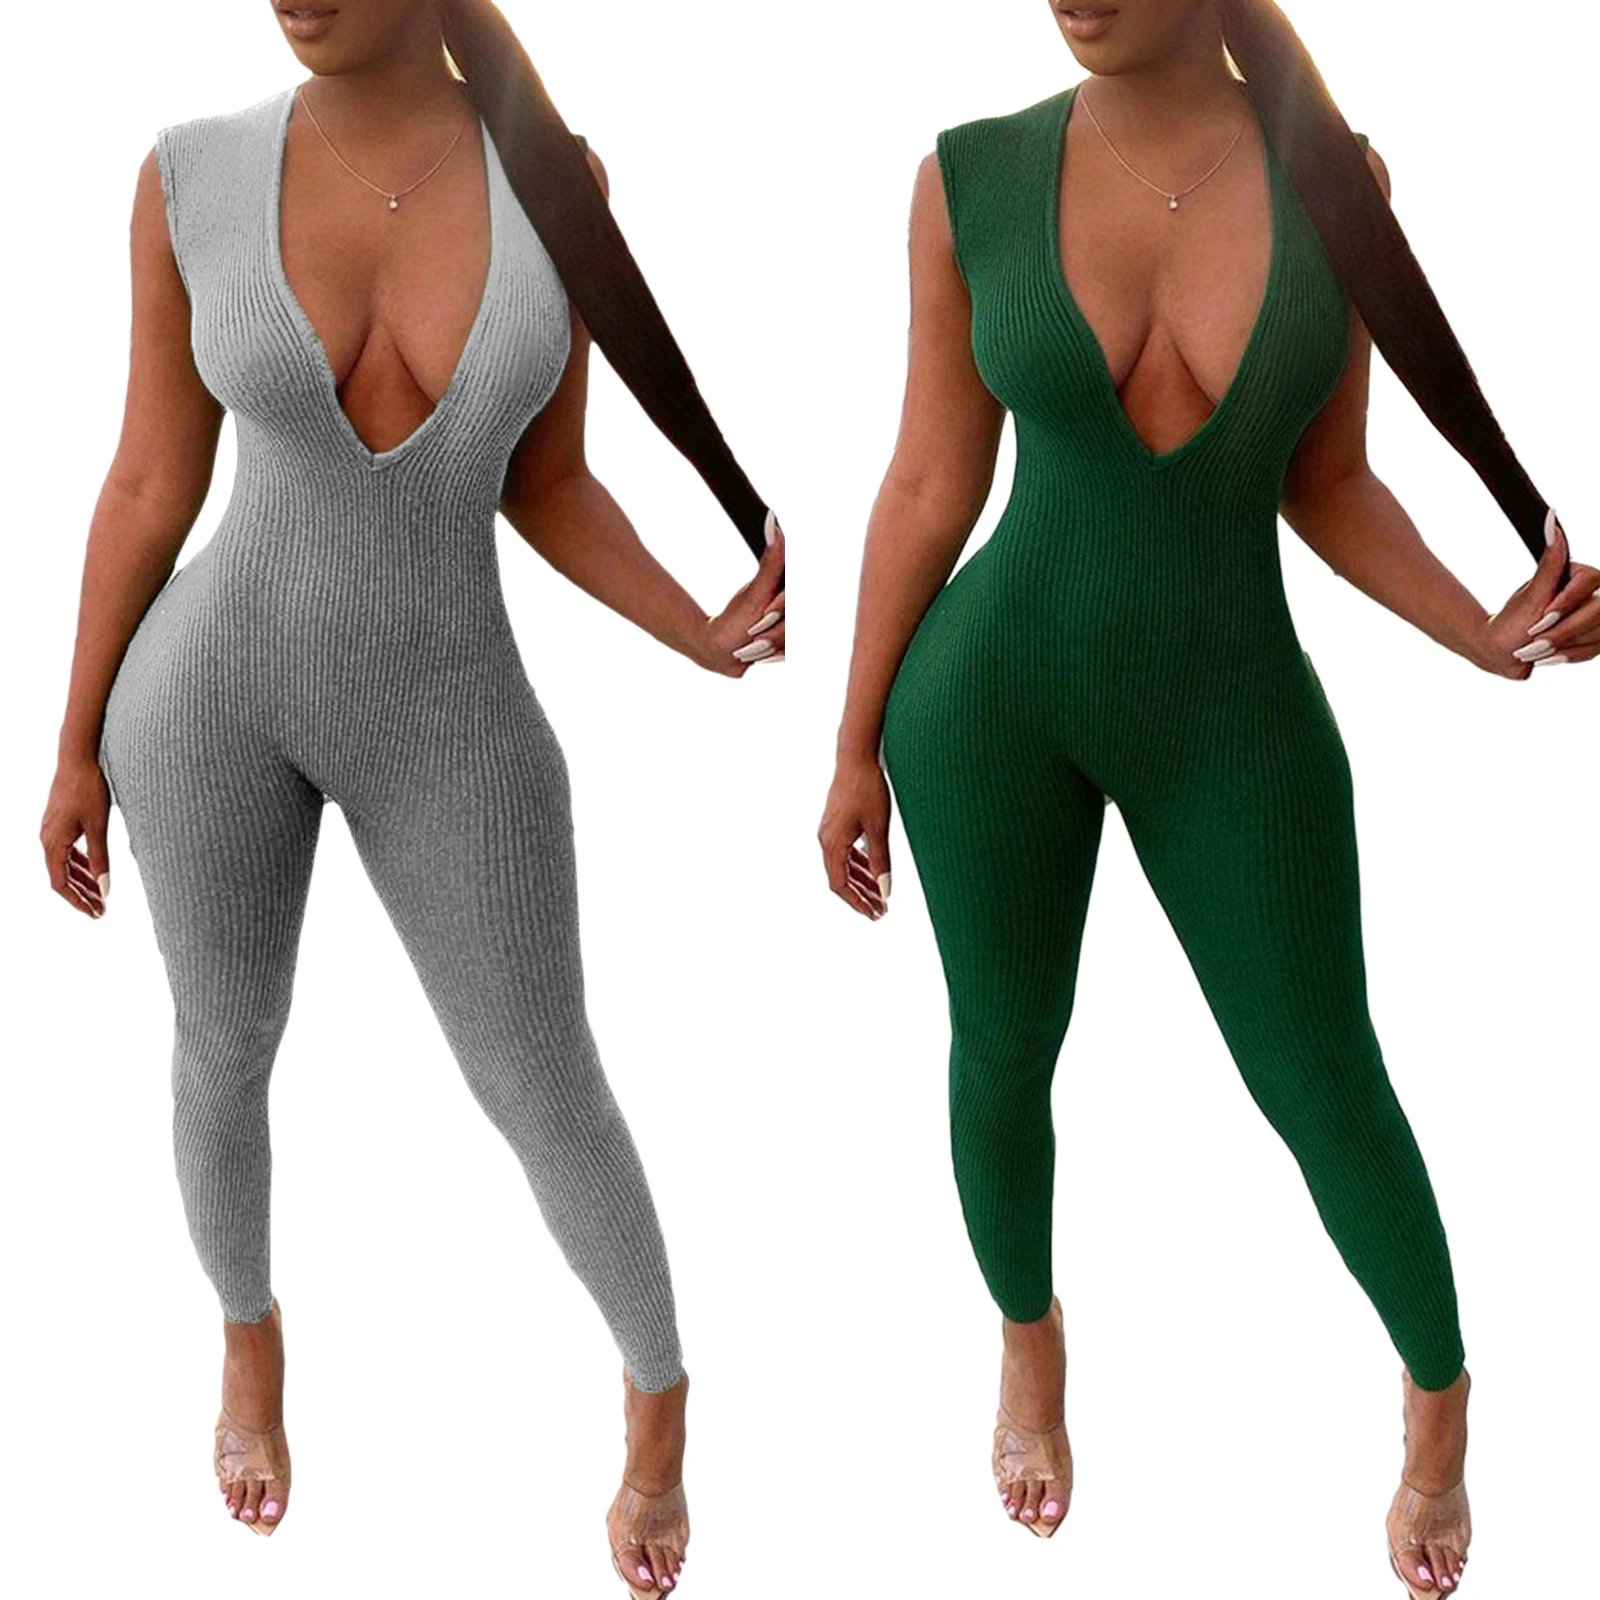 Deep V Neck Ribbed Long Jumpsuits Sleeveless Women Skinny Solid Army Green Bodycon Fashion Push Up One Piece Outfits